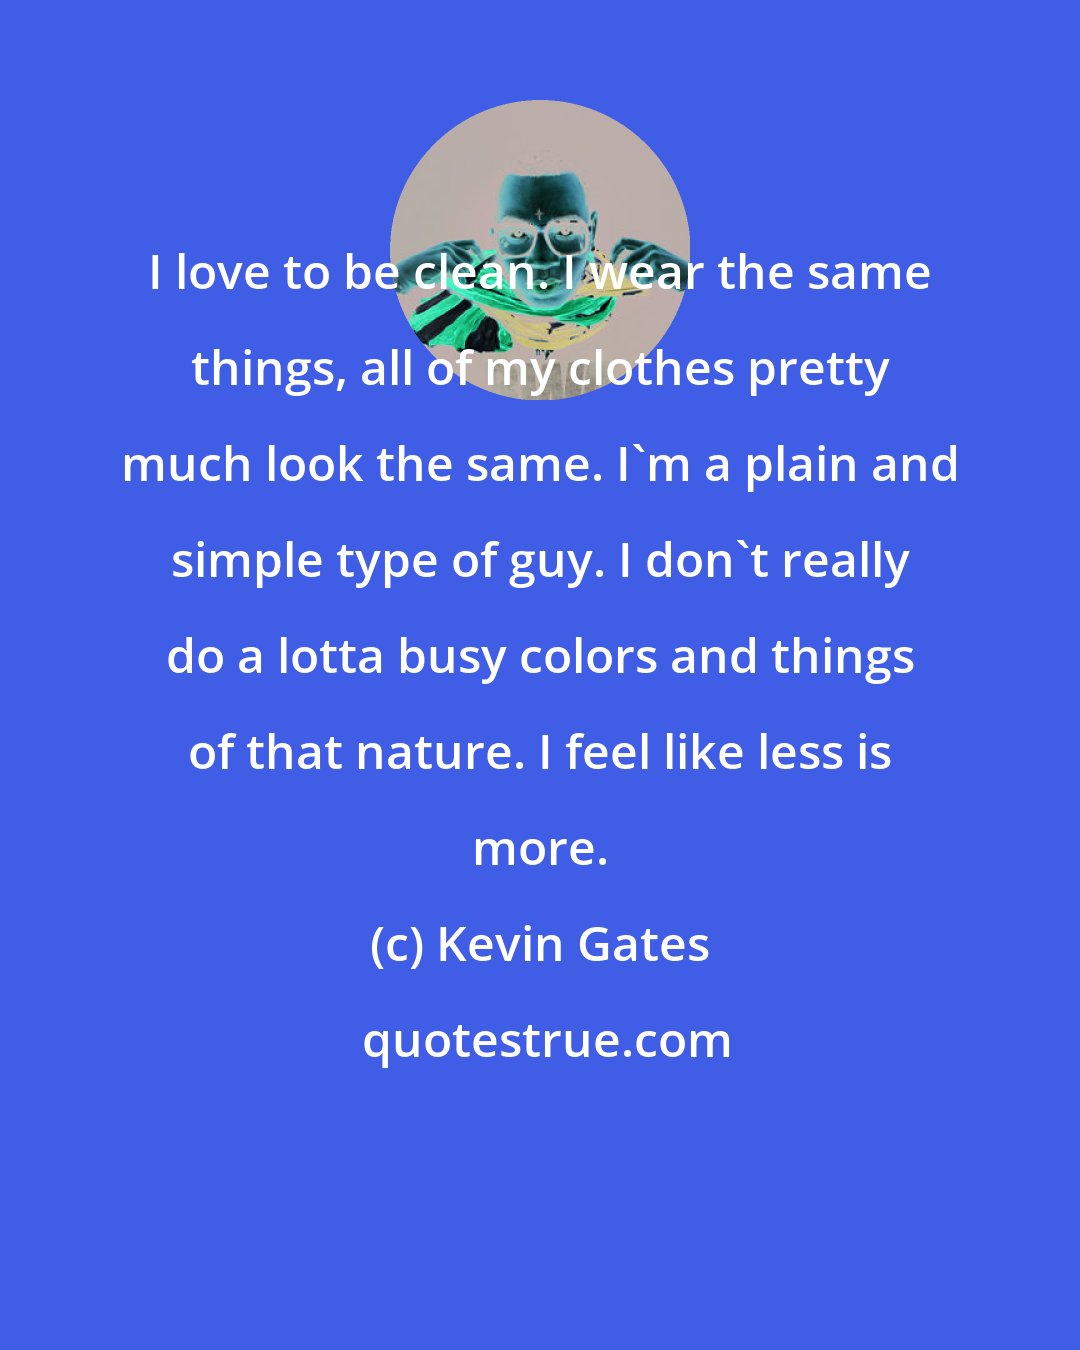 Kevin Gates: I love to be clean. I wear the same things, all of my clothes pretty much look the same. I'm a plain and simple type of guy. I don't really do a lotta busy colors and things of that nature. I feel like less is more.